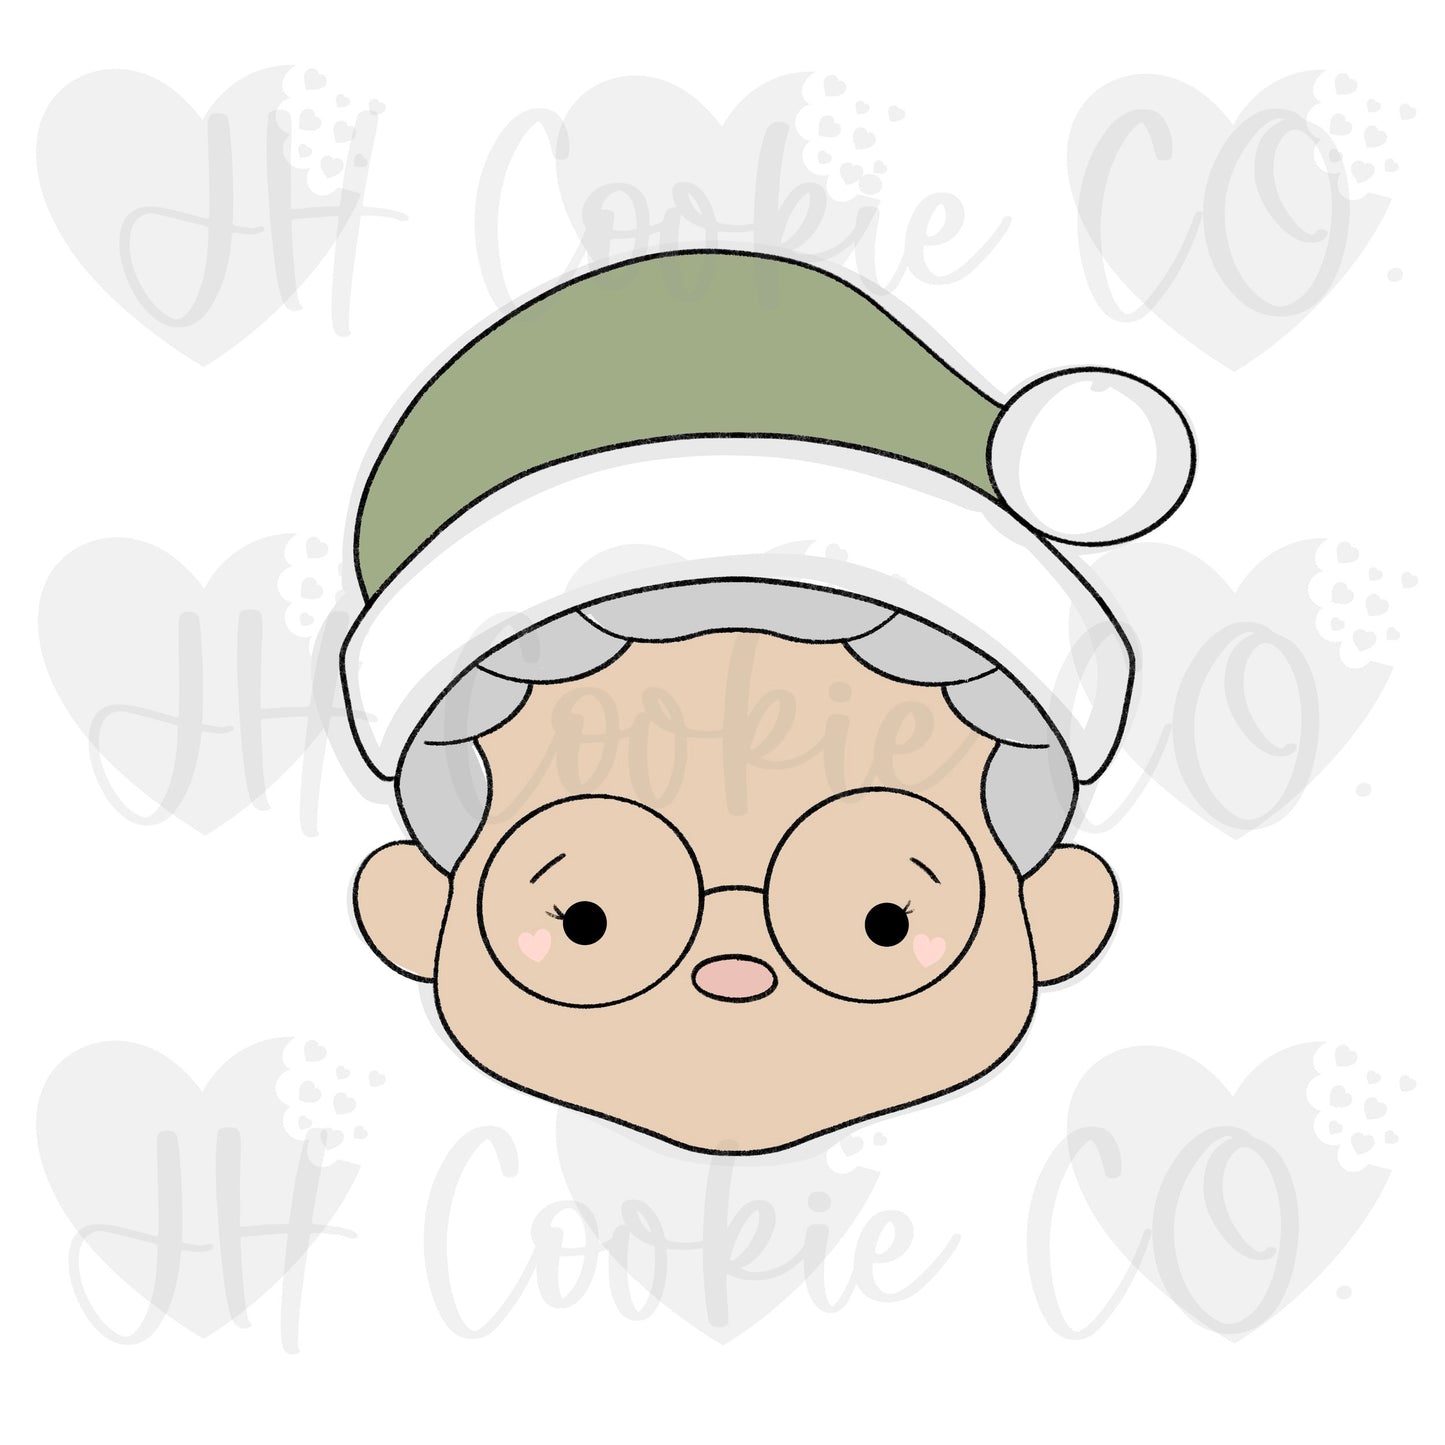 Mrs. Claus Face W/ Hat 2020 - Cookie Cutter